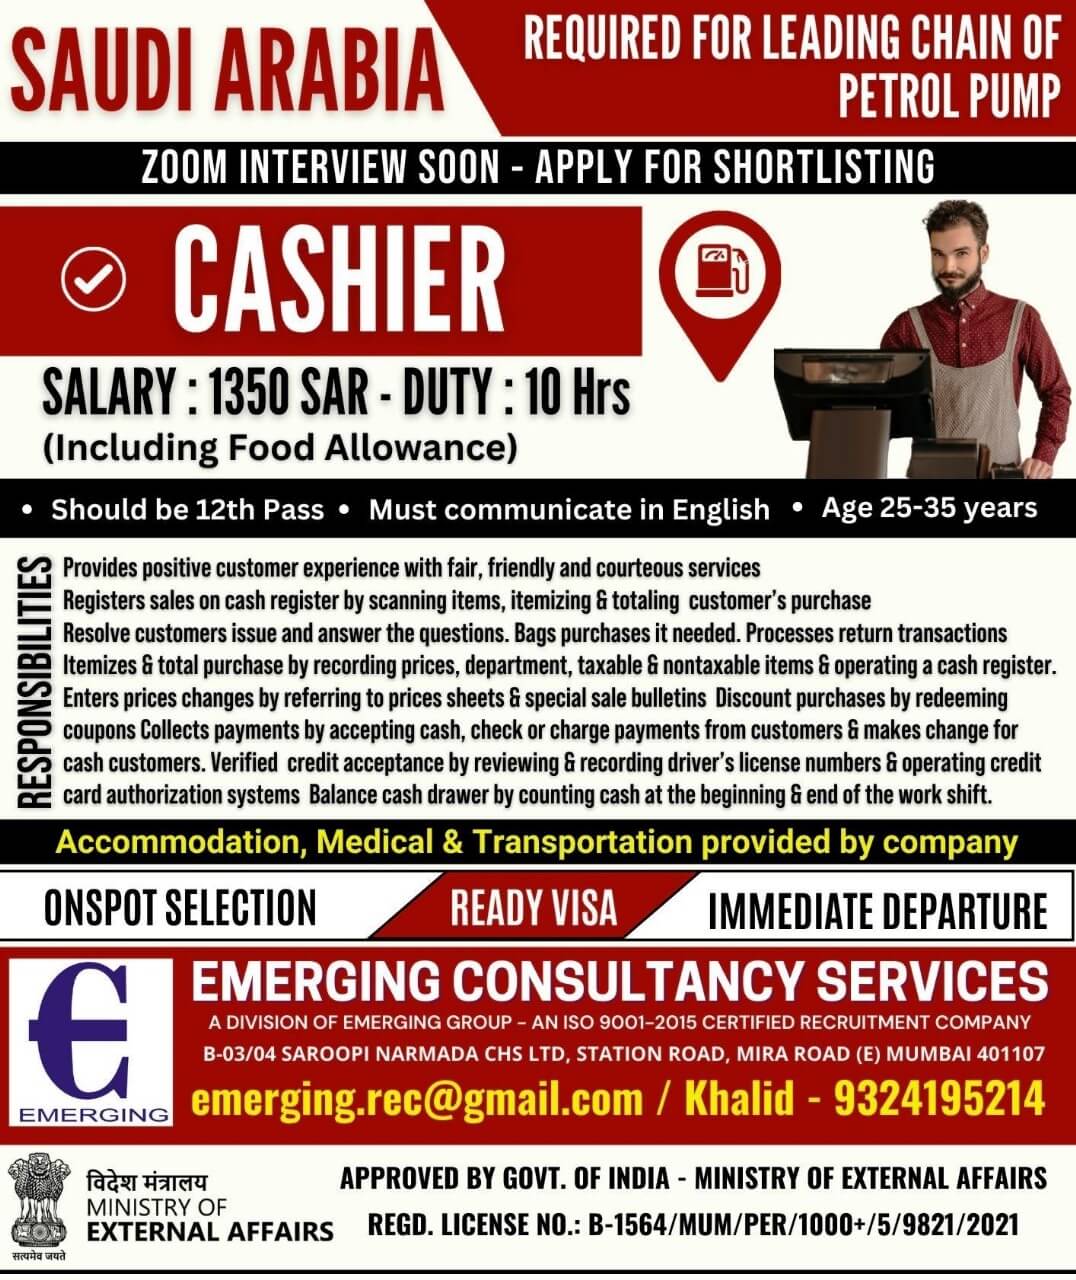 CASHIER REQUIRED FOR LEADING CHAIN OF PETROL PUMP - WAKALA READY